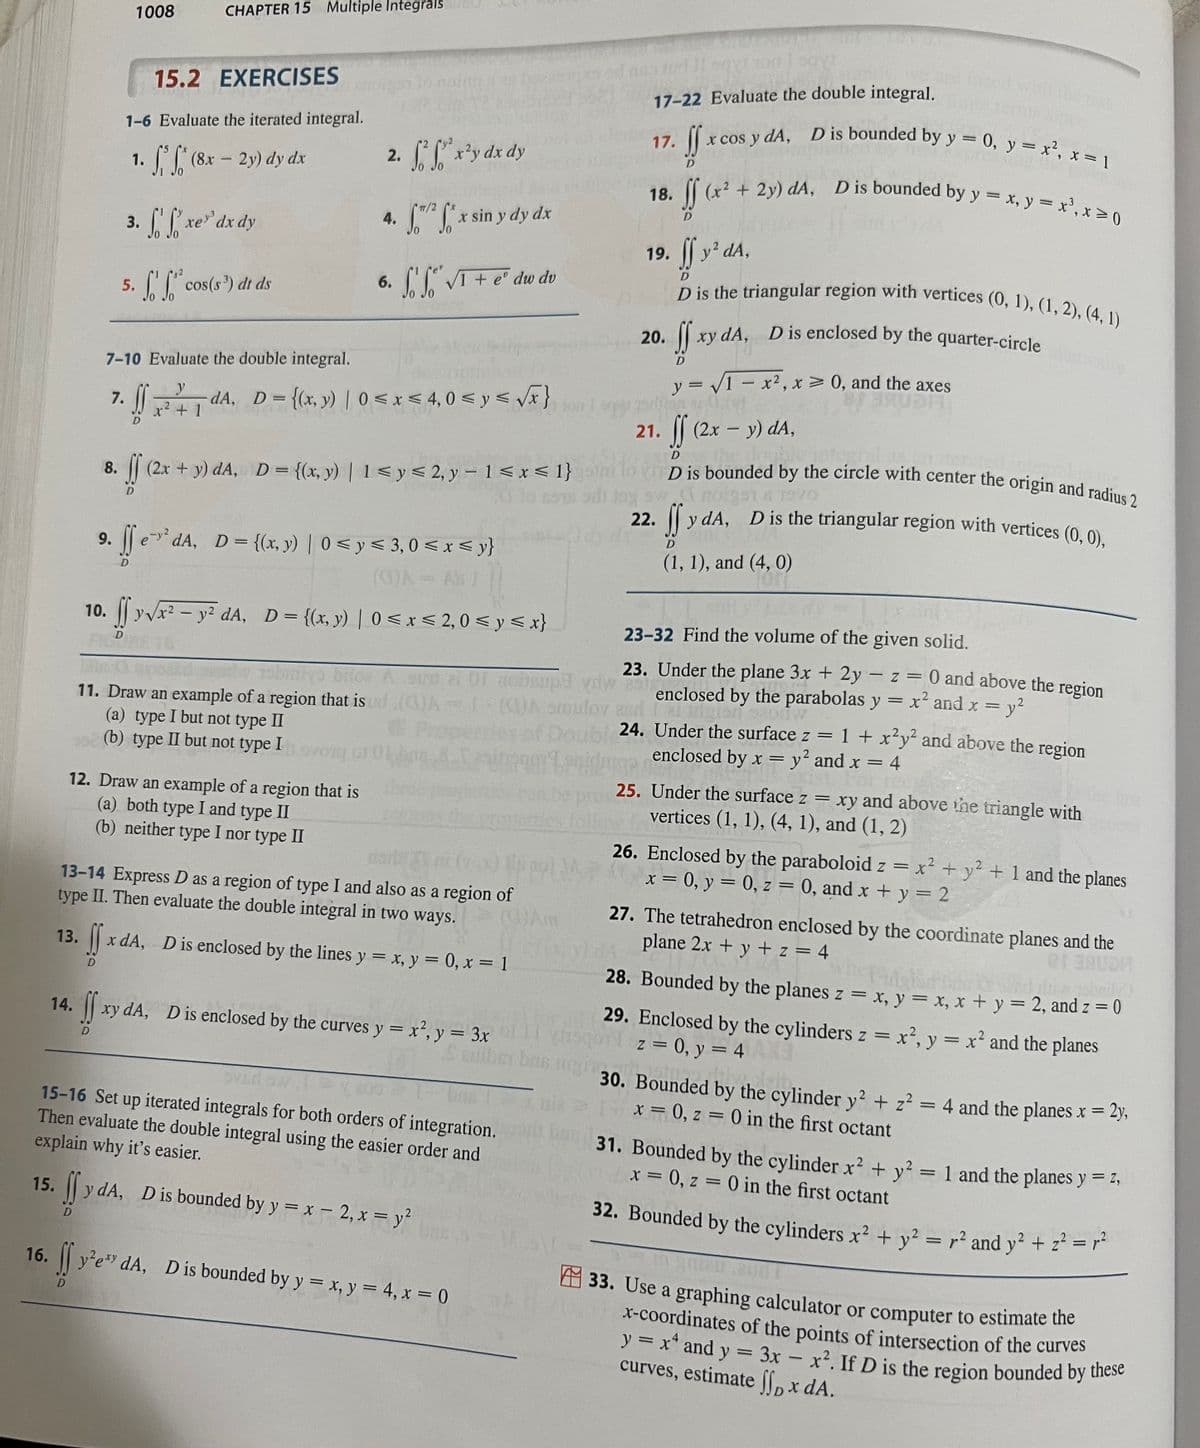 16.
1008
14.
CHAPTER 15 Multiple Integrals
15.2 EXERCISES
1-6 Evaluate the iterated integral.
1. (8x - 2y) dy dx
5.
3. fxe'dx dy
D
f. f* cos(s³) dt ds
2. f²f²x²y dx dy
4. x sin y dy dx
6.
12. Draw an example of a region that is
(a) both type I and type II
(b) neither type I nor type II
niyatin
TT/2
7-10 Evaluate the double integral.
y
7.
SS dA, D = {(x, y) | 0≤x≤ 4,0 ≤ y ≤ √√x}
x² + 1
nobiniyo bilos
11. Draw an example of a region that is
(a) type I but not type II
(b) type II but not type I
So So √I + eº dw dv
8.
ff (2x + y) dA, D = {(x, y) | 1 ≤ y ≤ 2, y - 1<x< 1}
D
9. fe²dA, D = {(x, y) | 0 ≤ y ≤ 3,0 ≤ x ≤ y}
<
<
10. ff y √x² − y² dA, D = {(x, y) | 0 ≤ x ≤ 2,0 ≤ y ≤x}
-
(3)A=1
13-14 Express D as a region of type I and also as a region of
type II. Then evaluate the double integral in two ways. (0)Am
13. fx dA, D is enclosed by the lines y = x, y = 0, x = 1
D
15. y dA, D is bounded by y = x - 2, x = y²
SS
xy dA, D is enclosed by the curves y = x², y = 3x
D
Sveds. It
15-16 Set up iterated integrals for both orders of integration.
Then evaluate the double integral using the easier order and
explain why it's easier.
If y²e dA,
y²exy dA, D is bounded by y = x, y = 4, x = 0
17-22 Evaluate the double integral.
17.
x cos y dA, D is bounded by y = 0, y = x², x = 1
If x
(x² + 2y) dA, D is bounded by y = x, y = x³, x ≥ 0
SS
19. ff y² dA,
D is the triangular region with vertices (0, 1), (1, 2), (4,1)
18.
20. ff
son og som er 0,01
1011 sayt
xy dA, D is enclosed by the quarter-circle
y = √1 = x², x = 0, and the axes
22.
21. ff (2x - y) dA,
D
sw.
de intent 1 a, mite
ID is bounded by the circle with center the origin and radius 2
23-32 Find the volume of the given solid.
23. Under the plane 3x + 2y - z = 0 and above the region
achup
BON
ydw
enclosed by the parabolas y = x² and x =
A omuloy es
zor 12
= y²
on ozoftw
24. Under the surface z = 1 + x²y² and above the region
enclosed by x = y² and x = 4
mo
A 01951 & 19vo
ff
y dA, D is the triangular region with vertices (0, 0),
(1, 1), and (4, 0)
nidrige
25. Under the surface z = xy and above the triangle with
vertices (1, 1), (4, 1), and (1, 2)
26. Enclosed by the paraboloid z = x² + y² + 1 and the planes
(x = 0, y = 0, z = 0, and x + y = 2
27. The tetrahedron enclosed by the coordinate planes and the
plane 2x + y + z = 4
28. Bounded by the planes z = x, y = x, x + y = 2, and z = 0
Samber bas night 30. Bounded by the cylinder y² + z² = 4 and the planes x = 2y,
1 x = 0, z = 0 in the first octant
29. Enclosed by the cylinders z = x²2, y = x² and the planes
z = 0, y = 4
31. Bounded by the cylinder x² + y²
x = 0, z = 0 in the first octant
32. Bounded by the cylinders x² + y² = r² and y² + z² = r²
y² = 1 and the planes y = Z,
33. Use a graphing calculator or computer to estimate the
x-coordinates of the points of intersection of the curves
y = x² and y
curves, estimate ff, x dA.
3x - x². If D is the region bounded by these
=